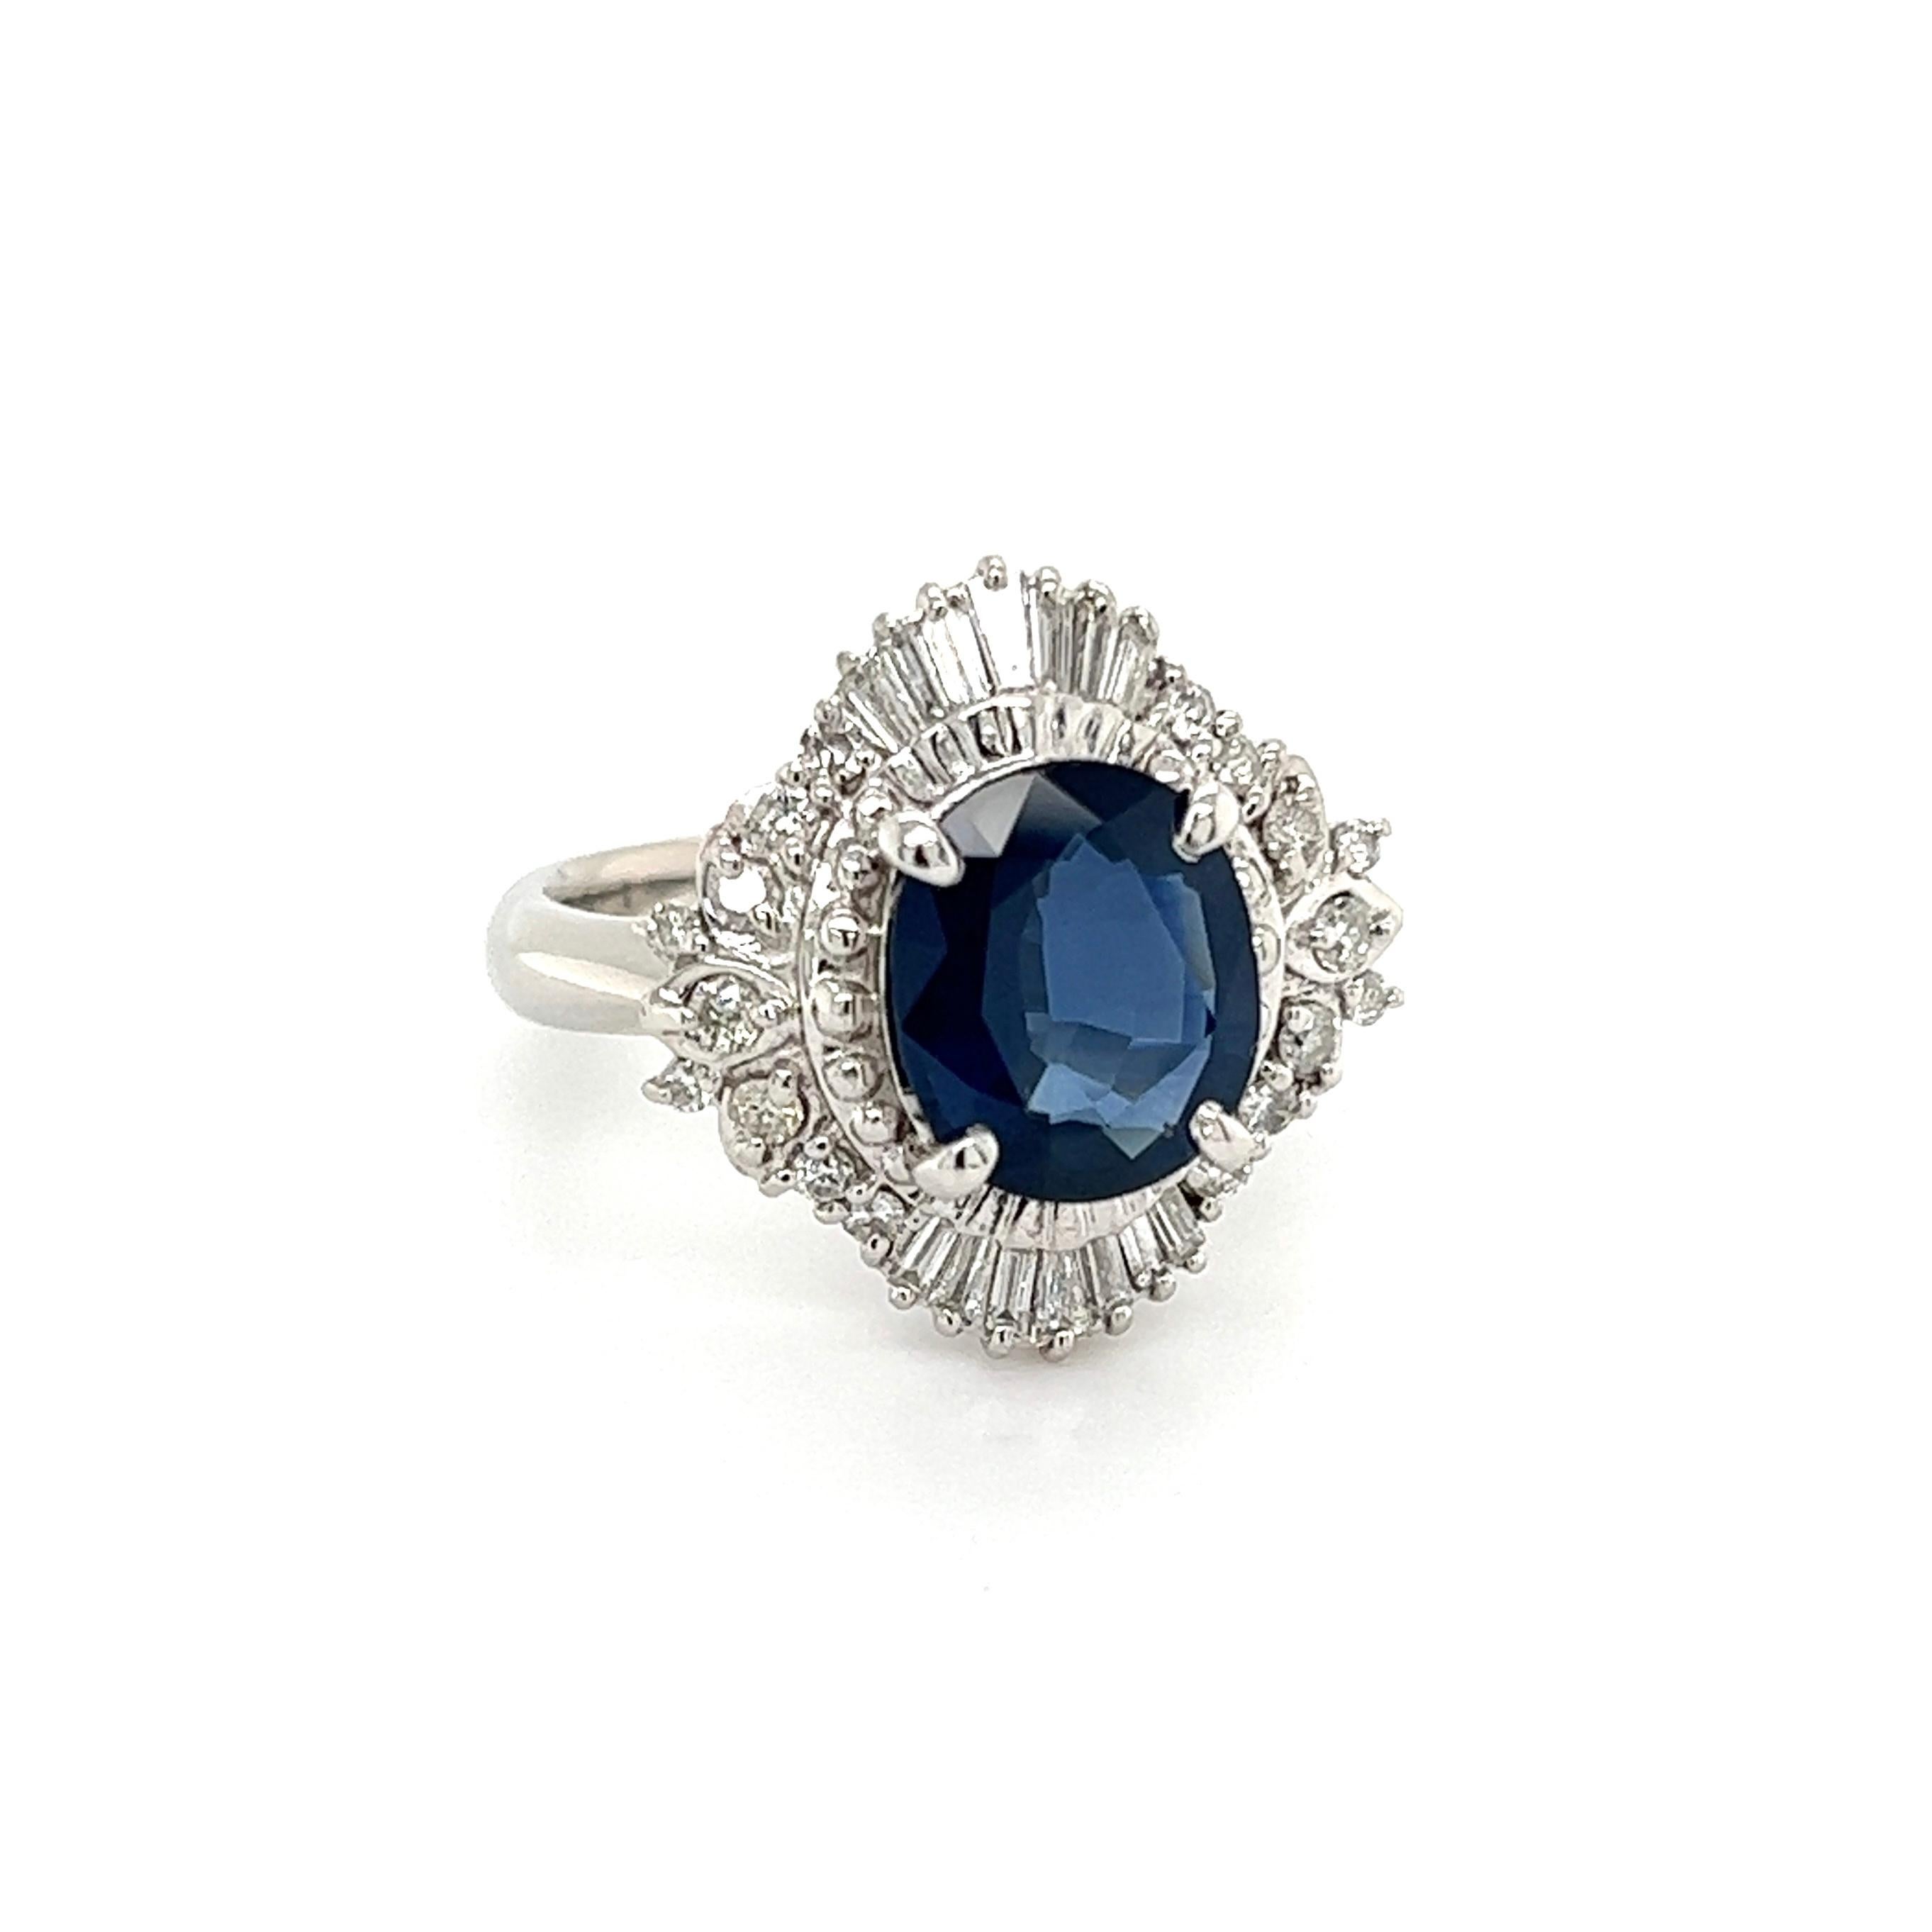 Simply Beautiful! Blue Sapphire and Diamond Art Deco Revival Platinum Ring. Centering a securely set Oval Blue Sapphire, weighing approx. 2.84 Carat, surrounded by Diamonds, weighing approx. 0.55tcw. Hand crafted Platinum mounting. Approx.